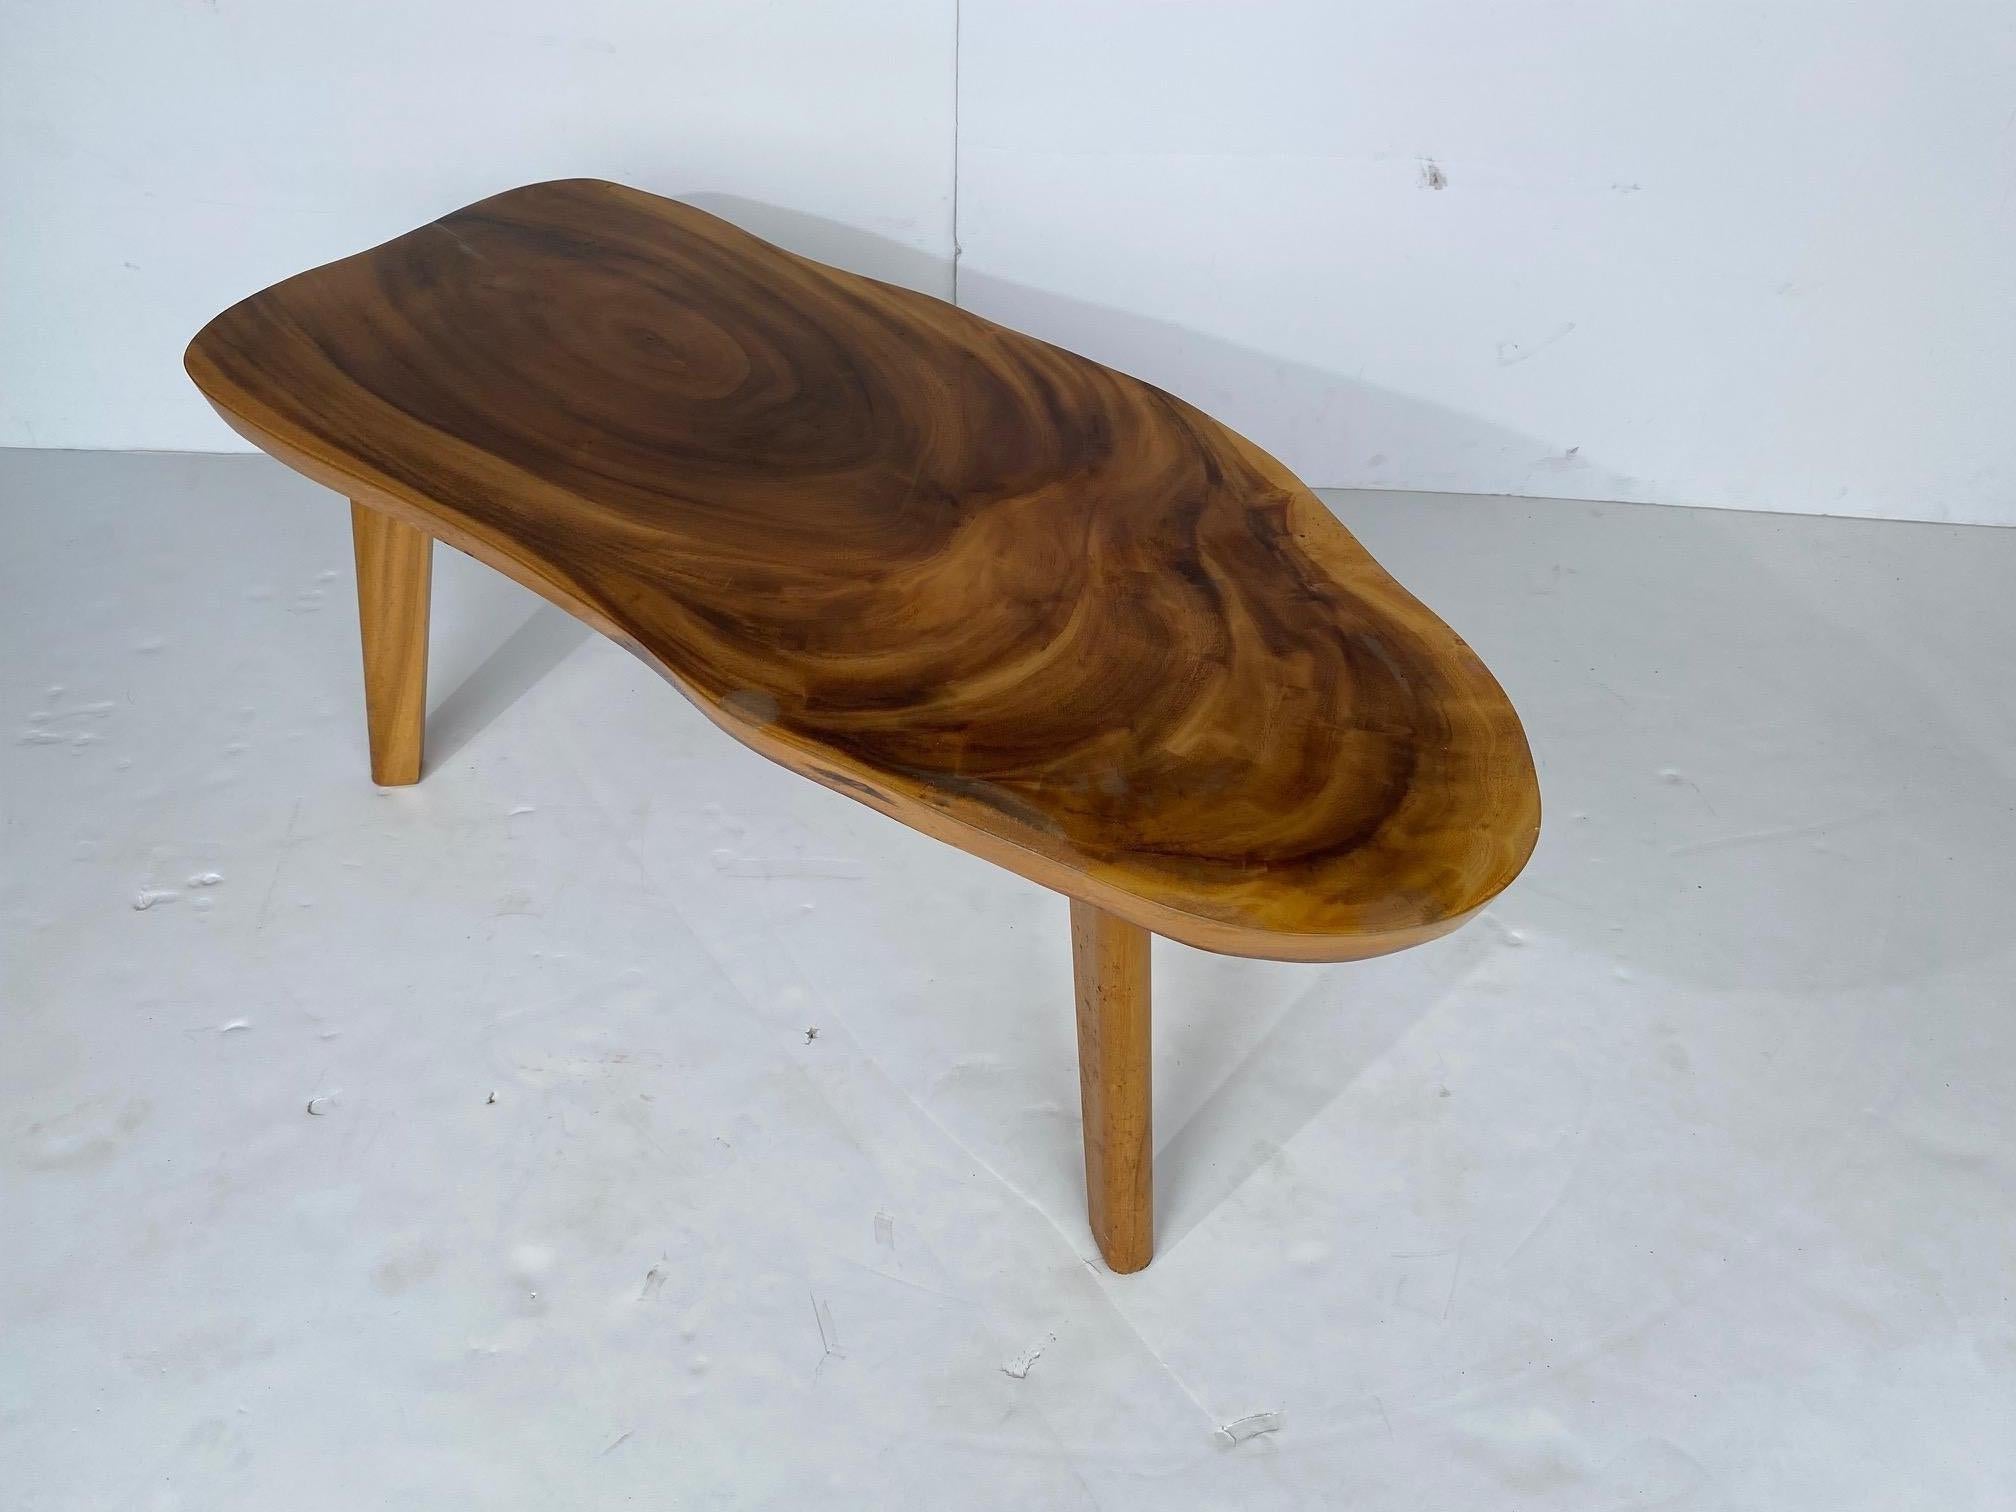 Mid-century, solid koa wood coffee table. This piece is solid, sturdy, and free of any significant damage.

There are some tiny natural-forming hairline cracks, which you can probably see in the photos. These do not impact the overall integrity or